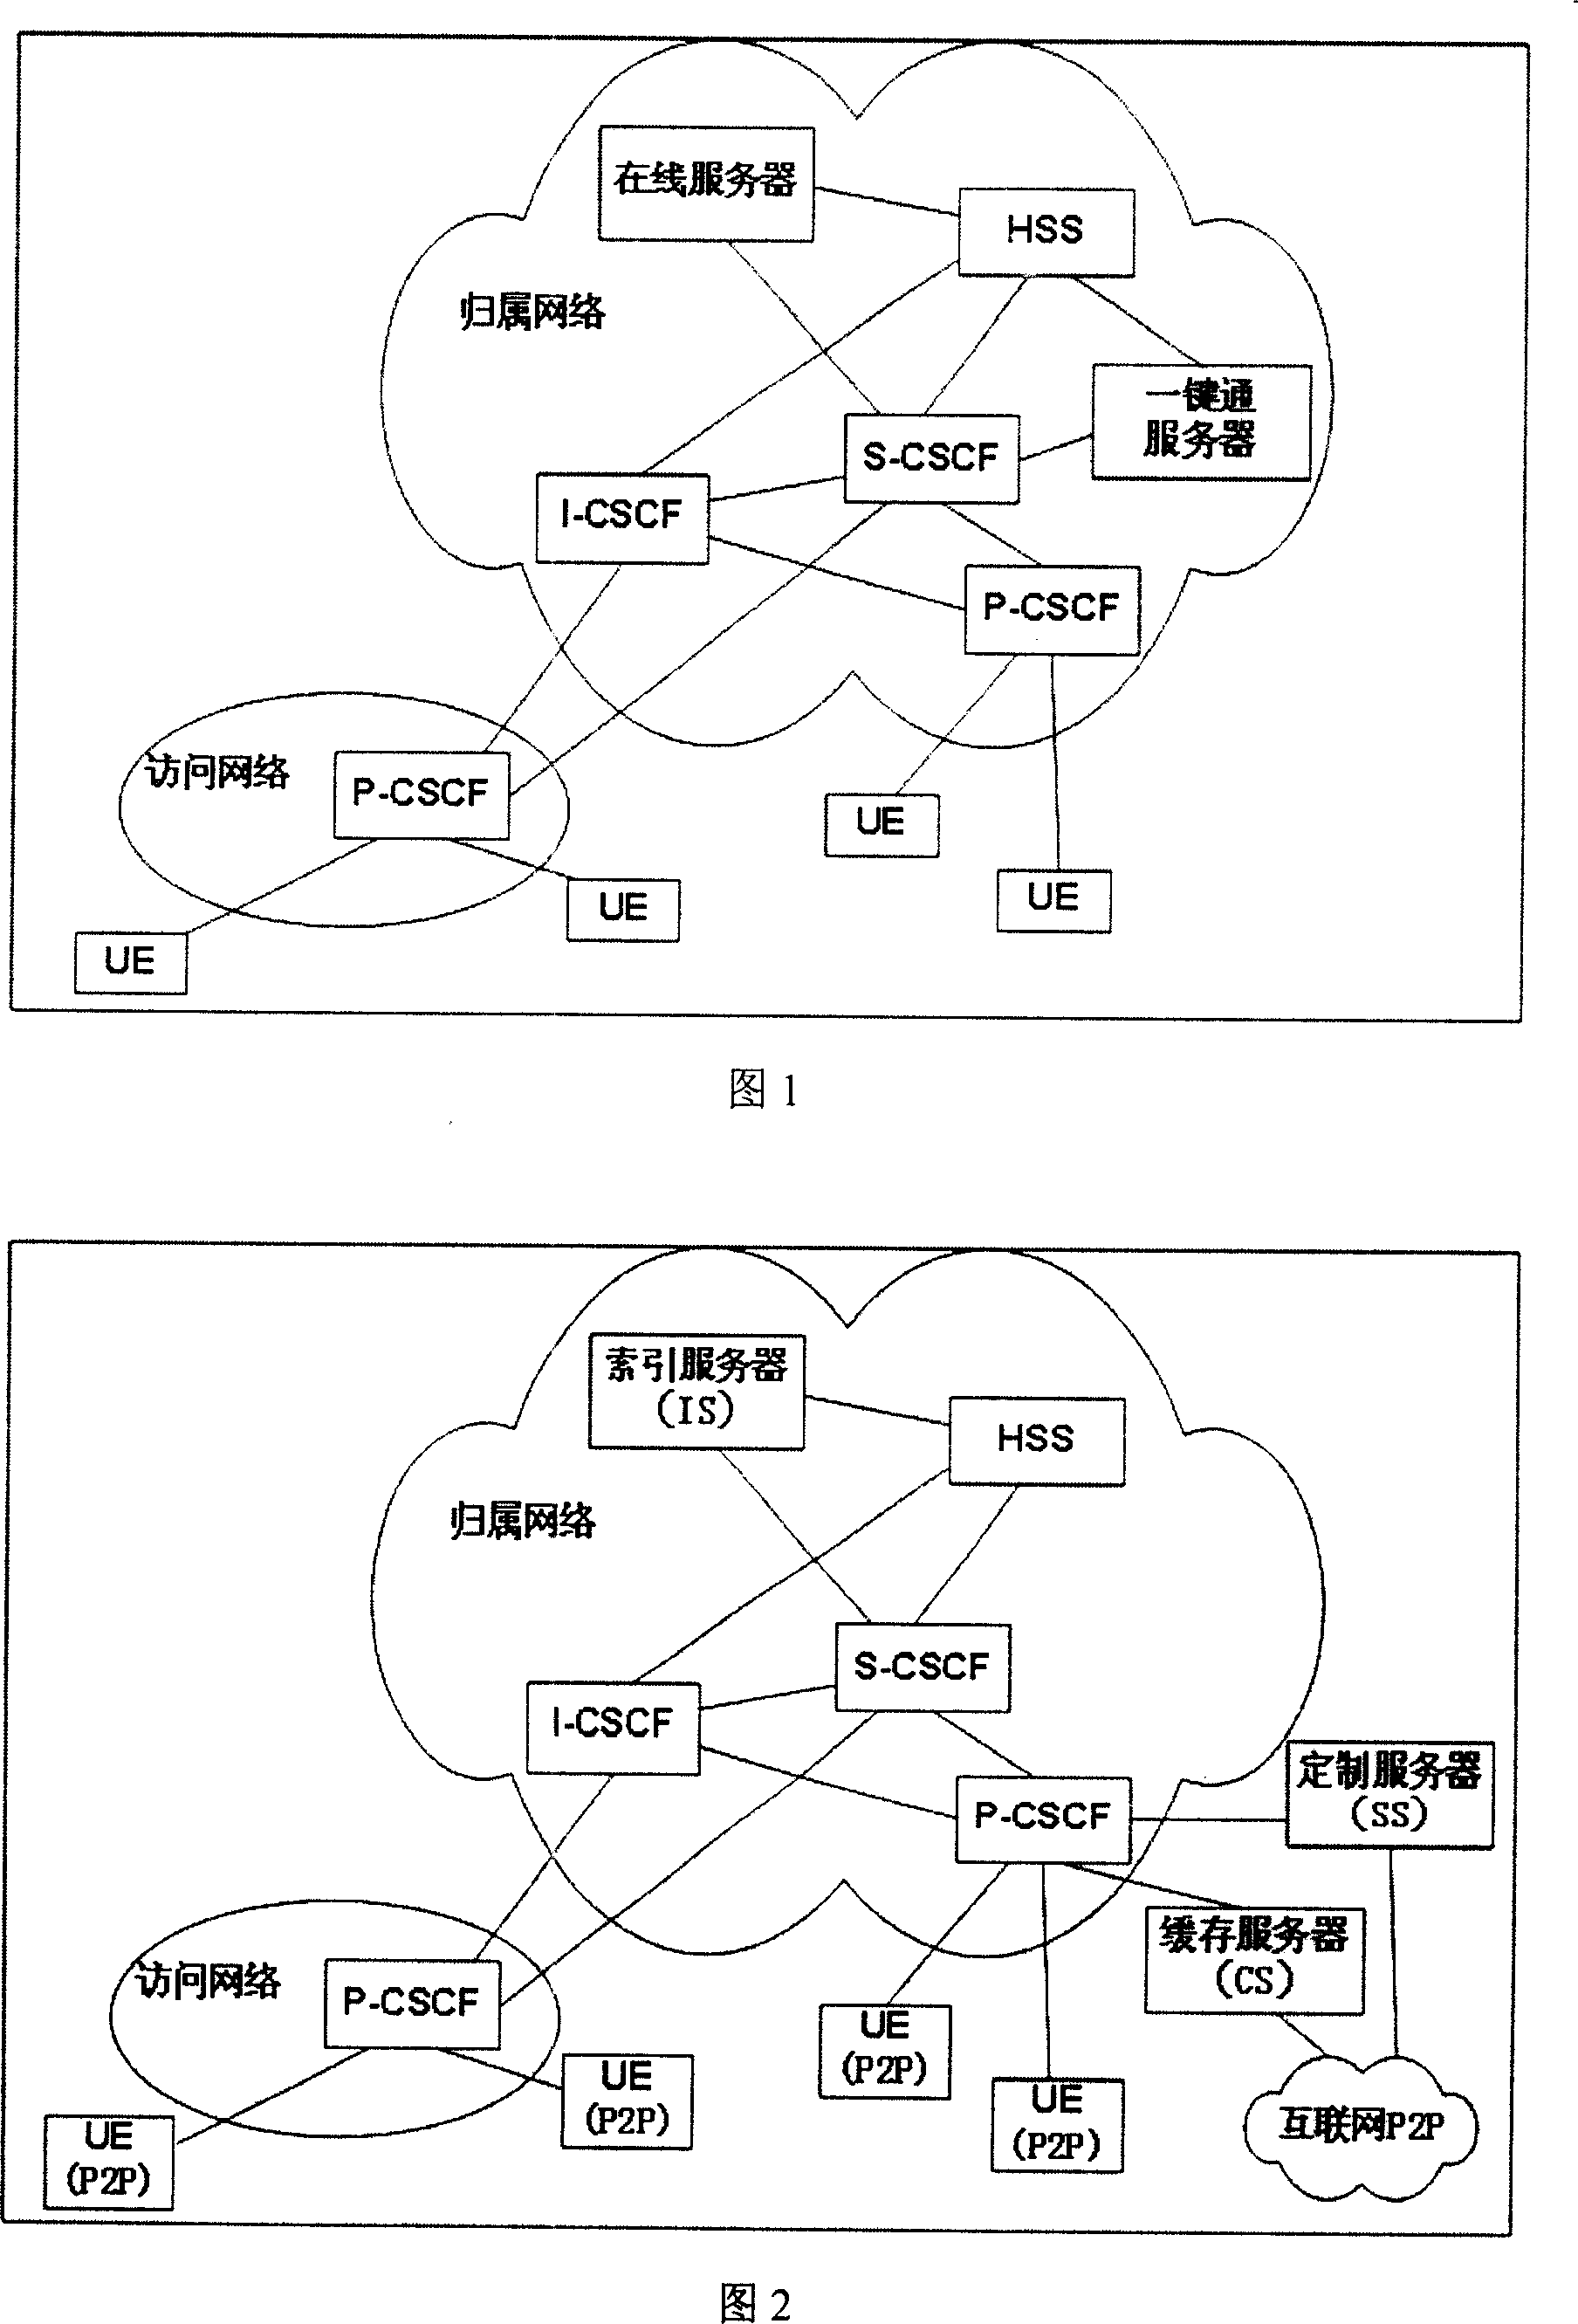 Peer-to-peer networking file sharing service network structure